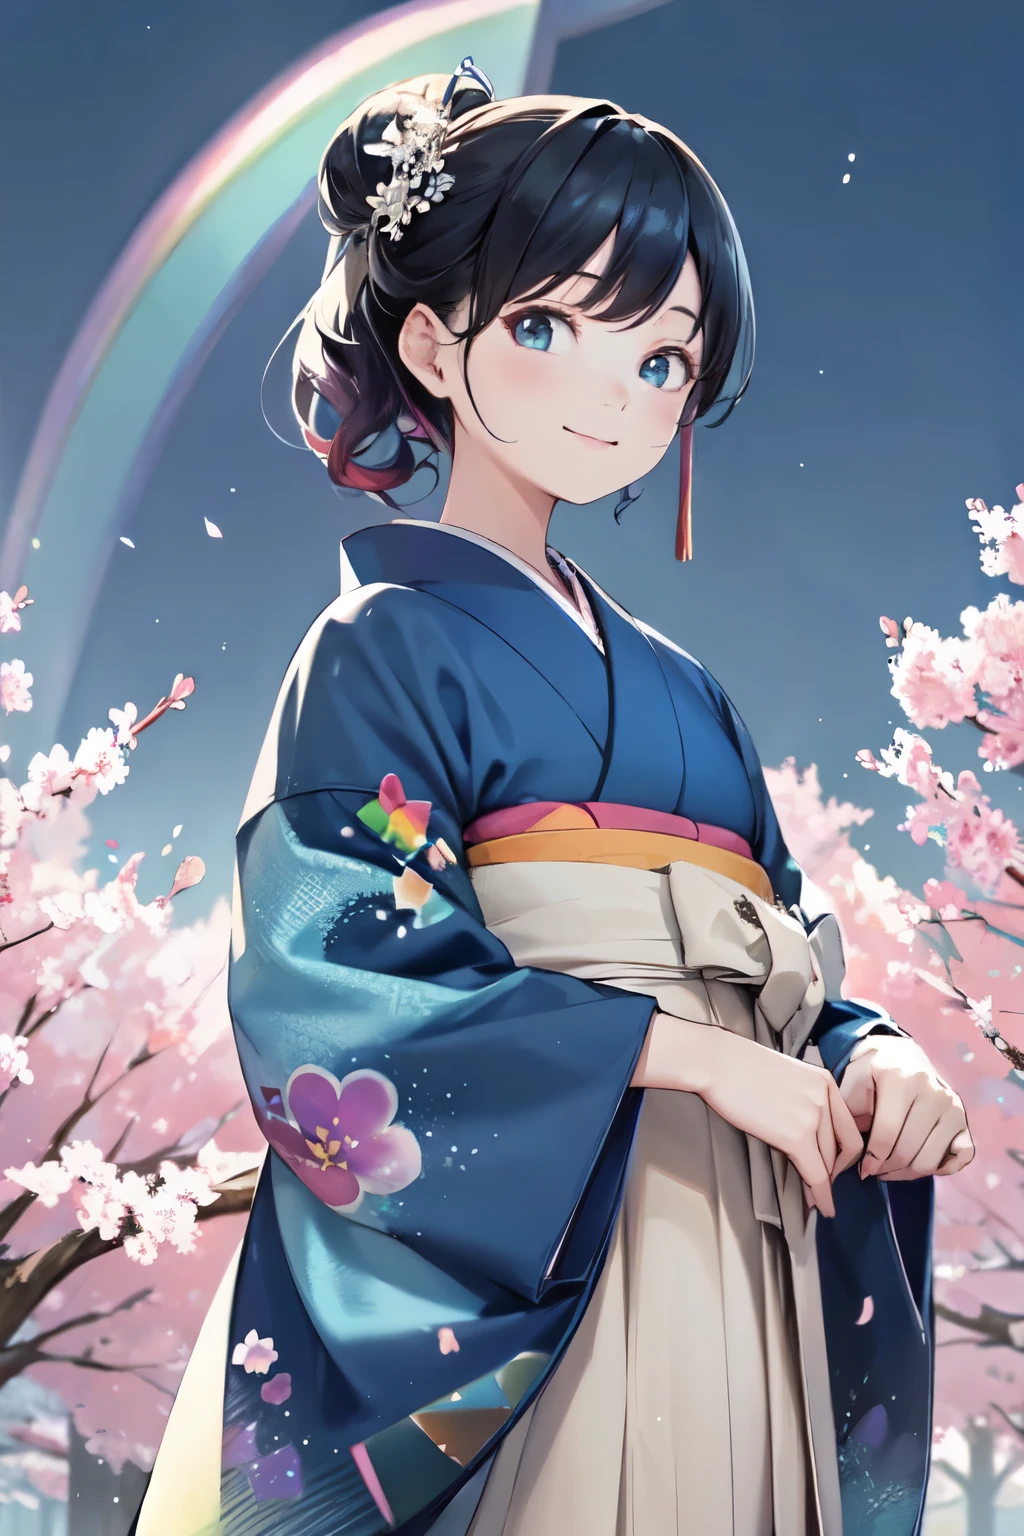 (best quality:1.2), masterpiece,Watercolor,anime,kawaii,1 female, 19 years old,cute,ultra-detailed face,cute detailed eyes,smile,black hair,chignon,Light blue stardust pattern kimono,(rainbow gradient 袴 dark blue:1.4),Standing watching the audience,Cherry tree,Cherry blossom snowstorm in the scenery,,modern japan,graduation ceremony,University,Inside the school grounds where the sun shines